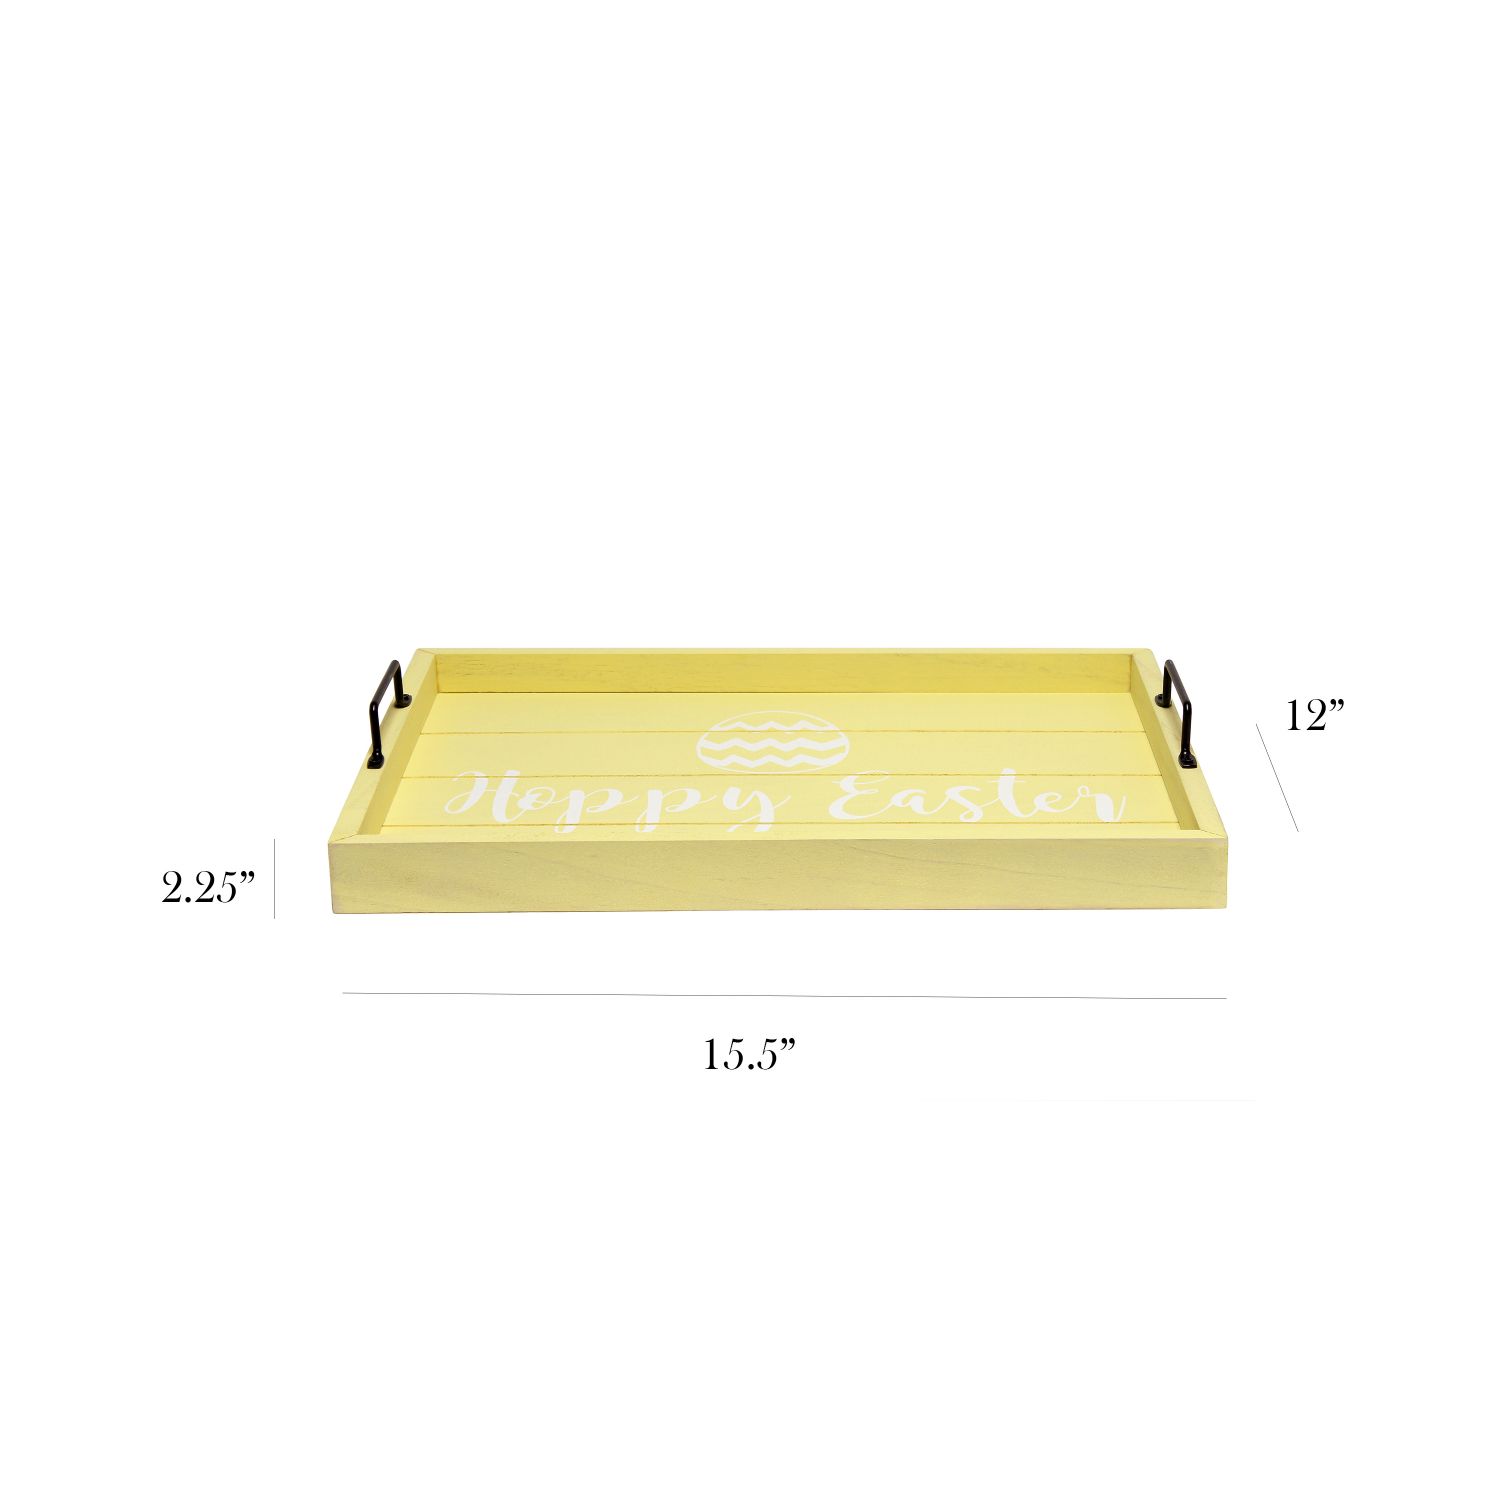 Mod Lighting and Decor "Hoppy Easter" Rectangular Wooden Accent Tray with Handles - 15.5" - Yellow